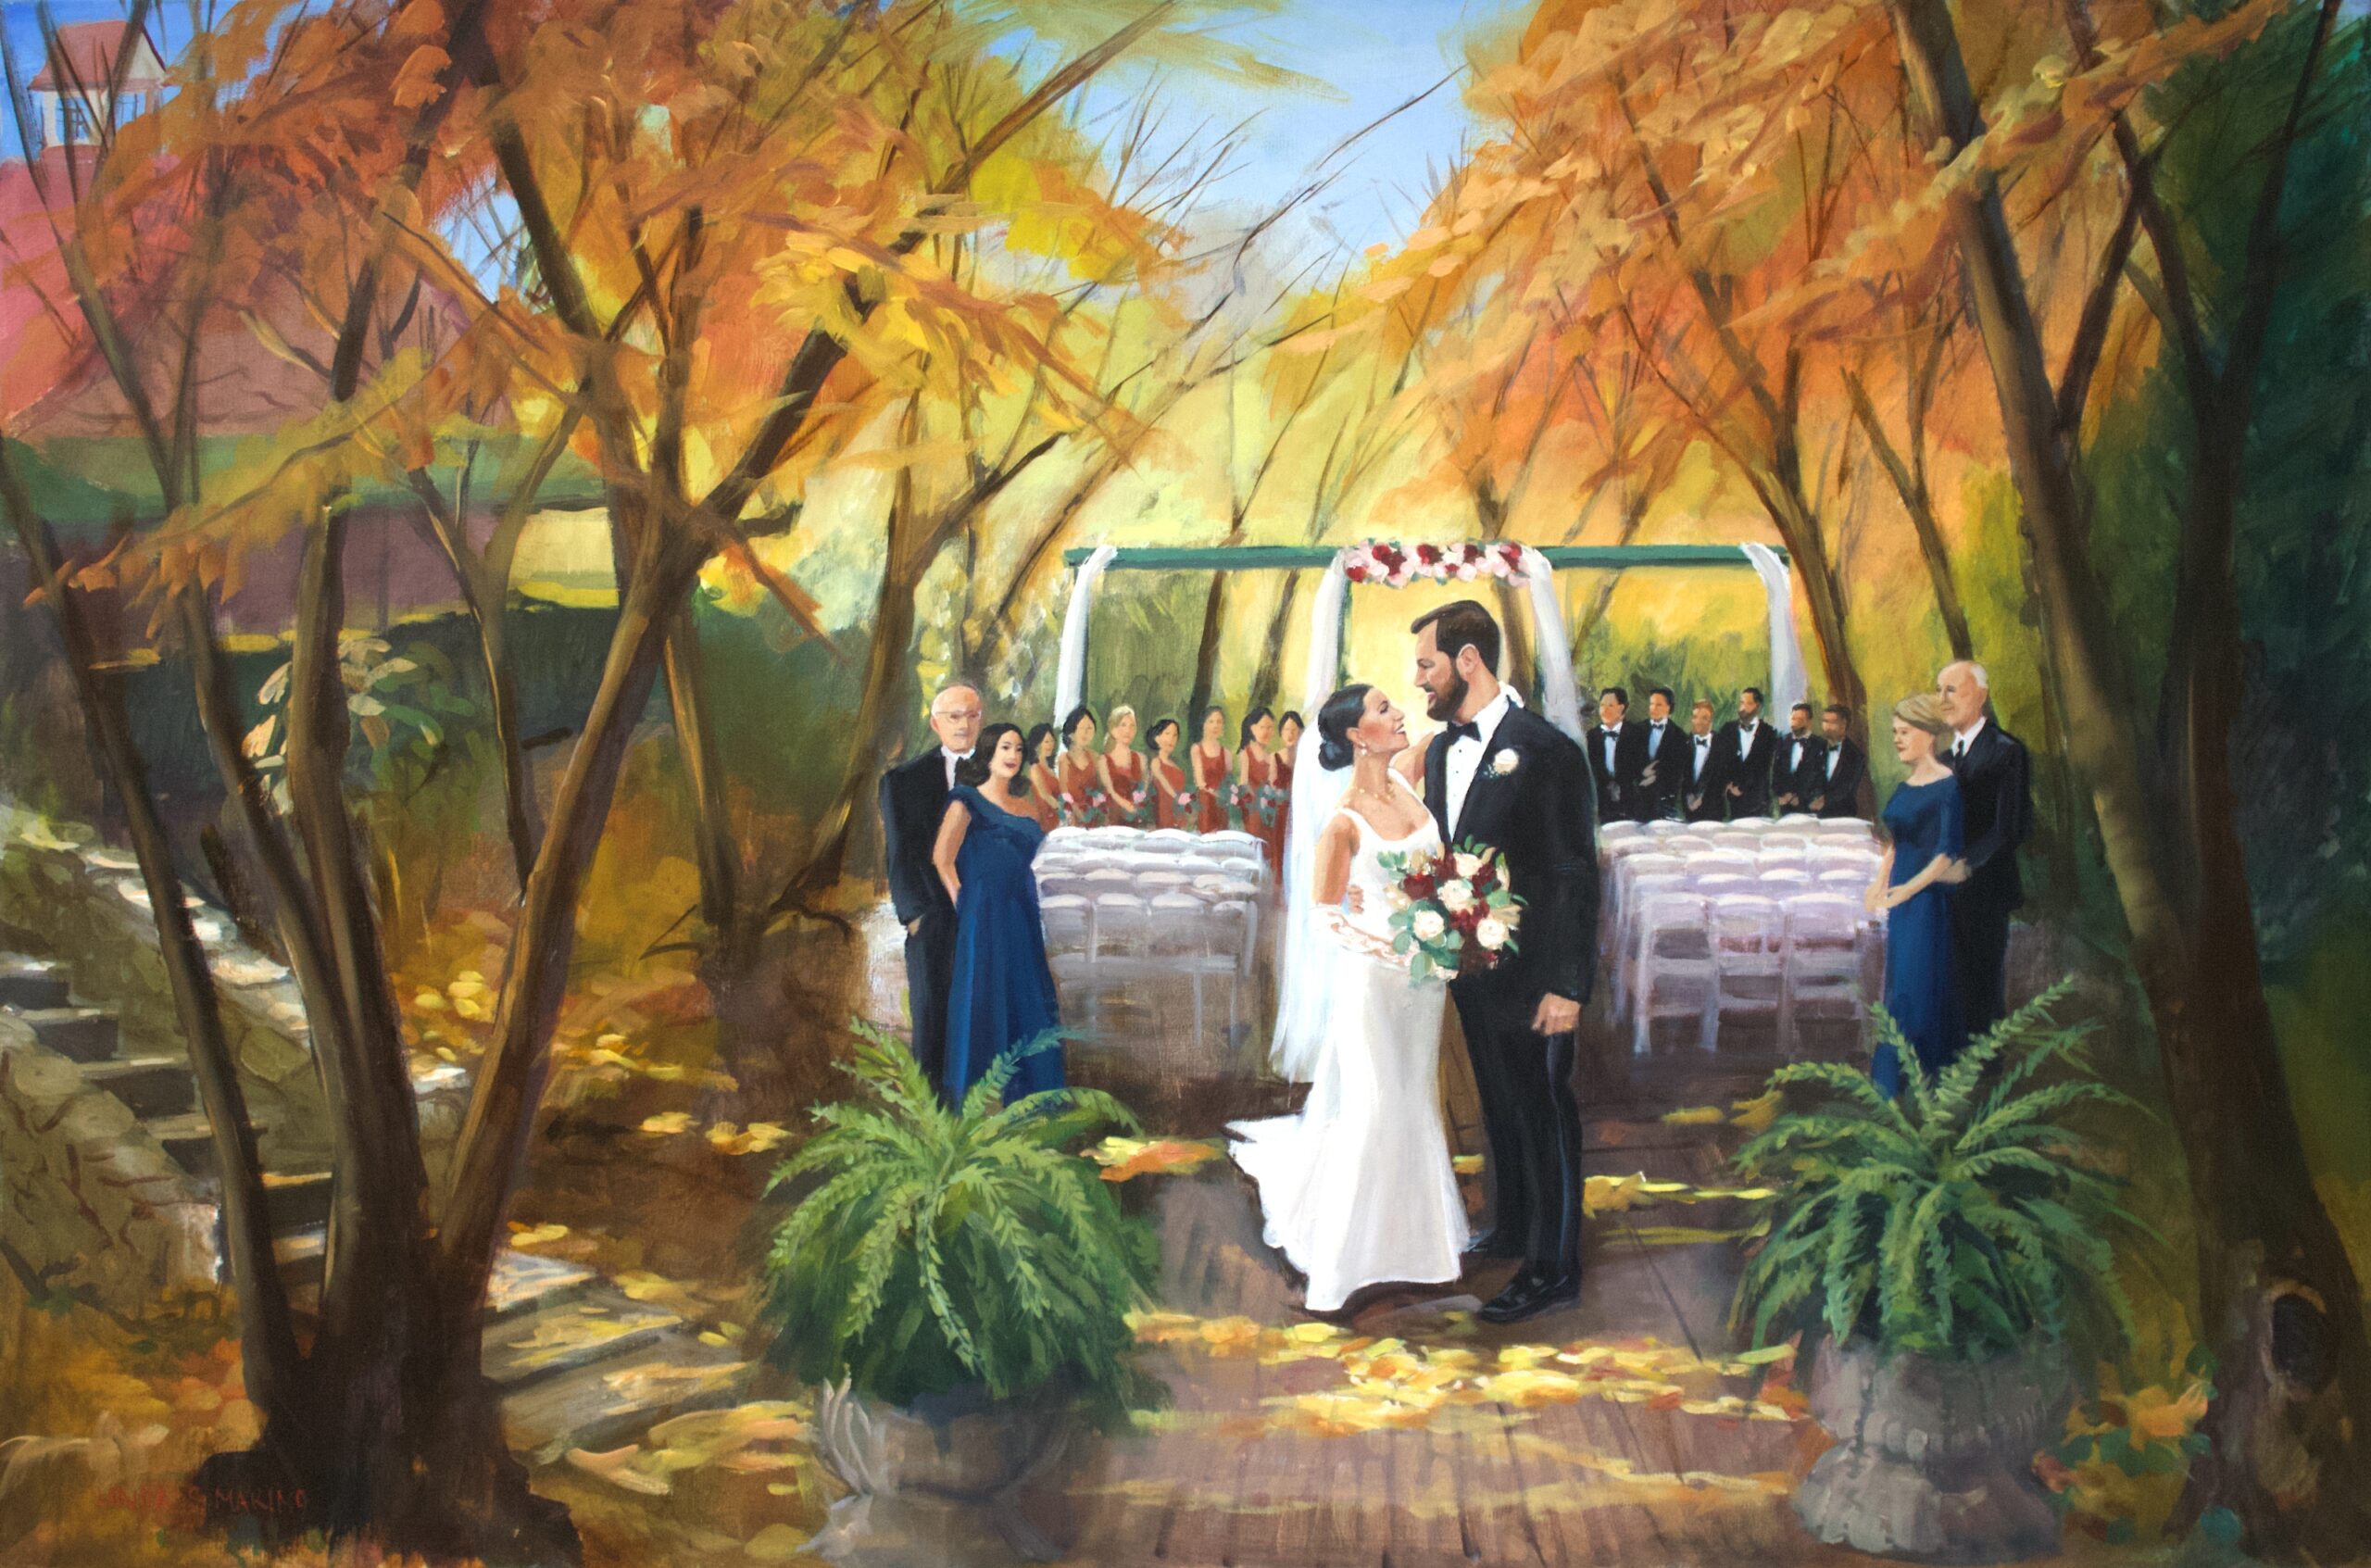 live wedding painting of bride and groom at outdoor autumn wedding ceremony with parents and wedding party by Linda Marino